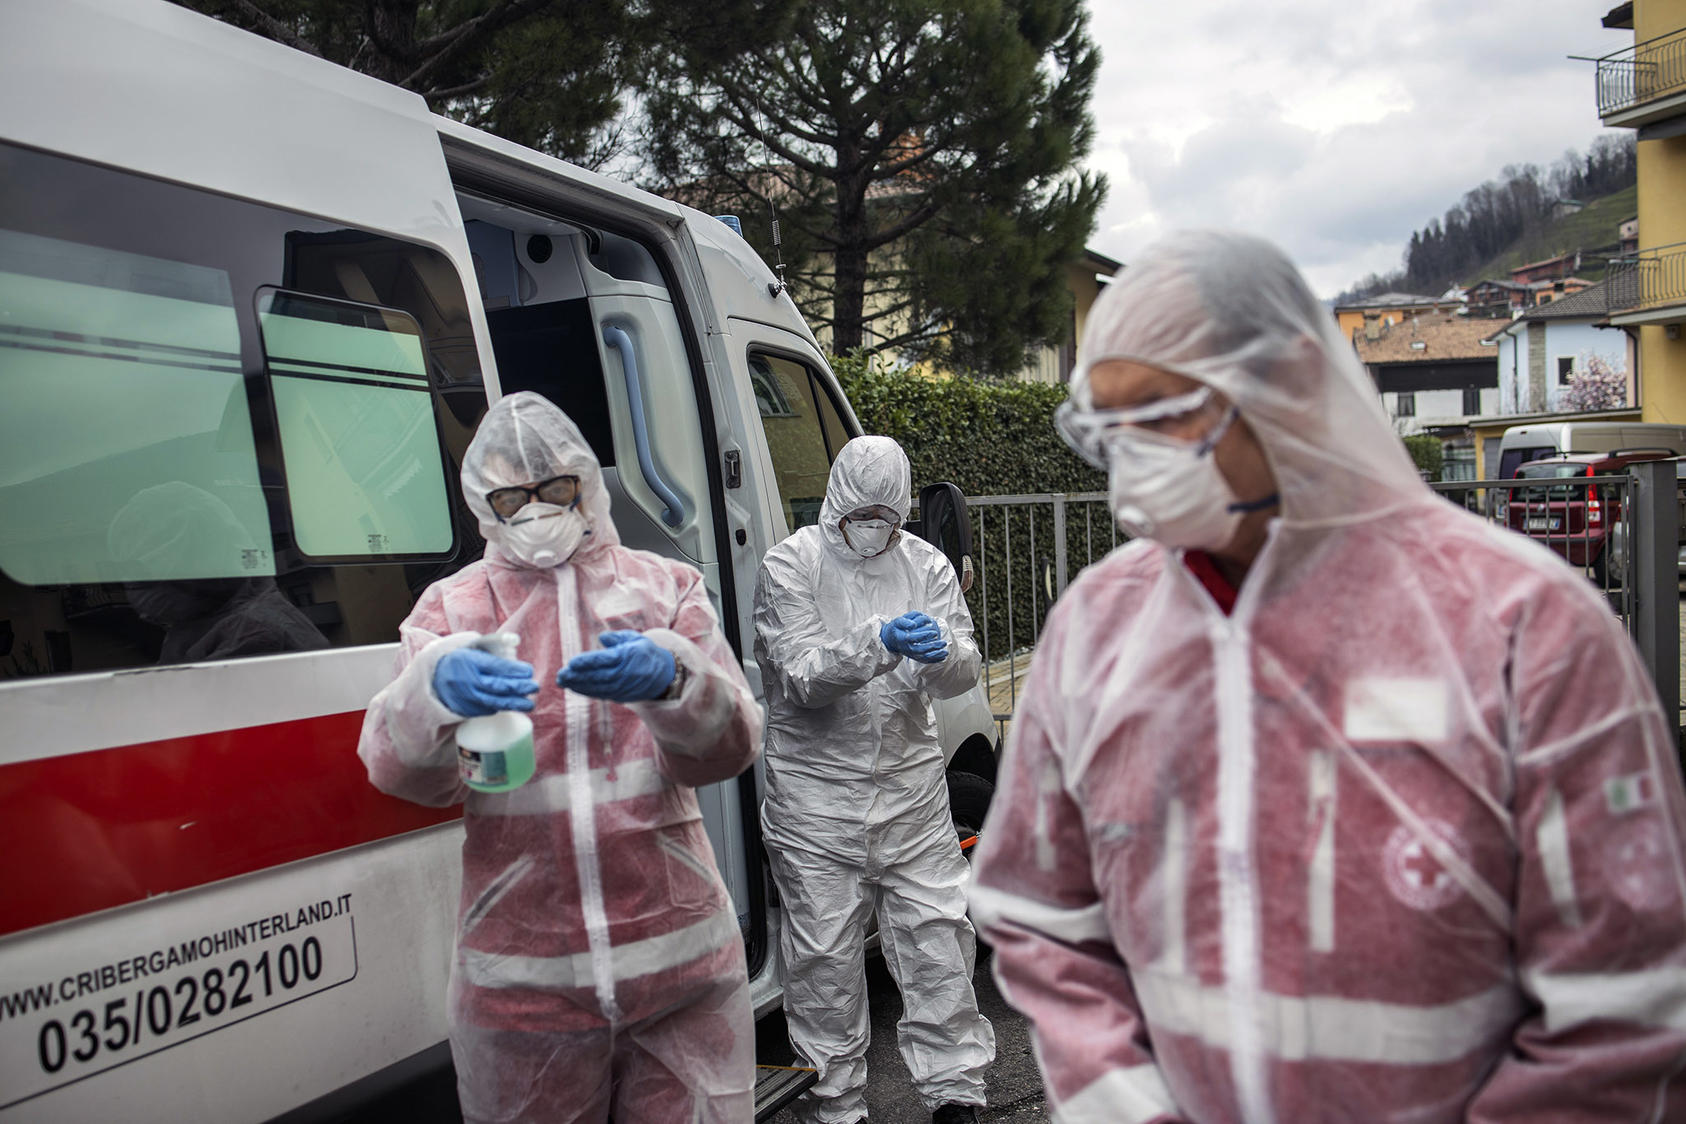 Red Cross workers disinfect to try to avoid spreading the coronavirus, in Pradalunga, Italy, March 15, 2020. (Fabio Bucciarelli/The New York Times)